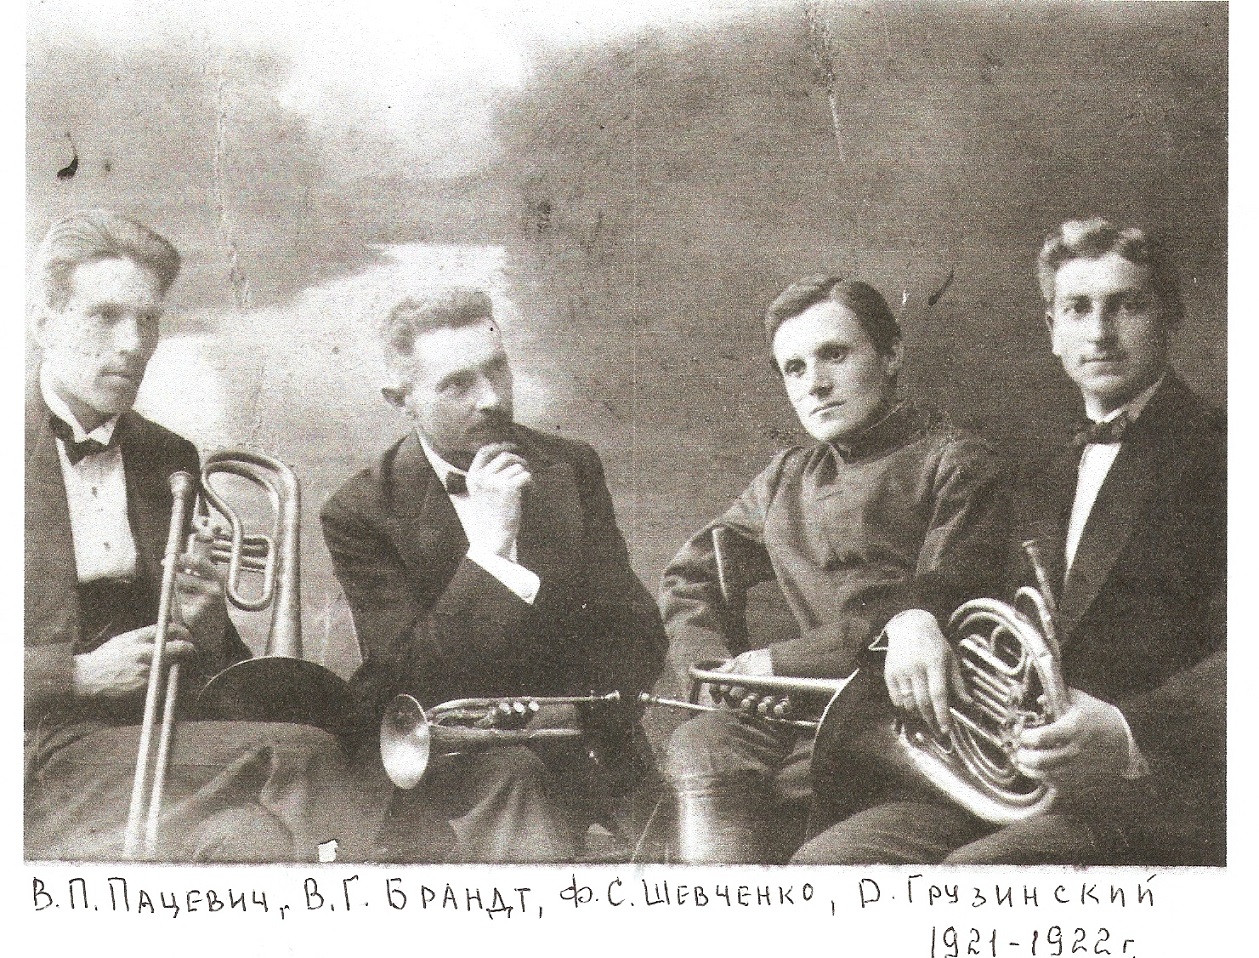 A Celebration of 100 Years of the Trombone Class at Saratov State Conservatory